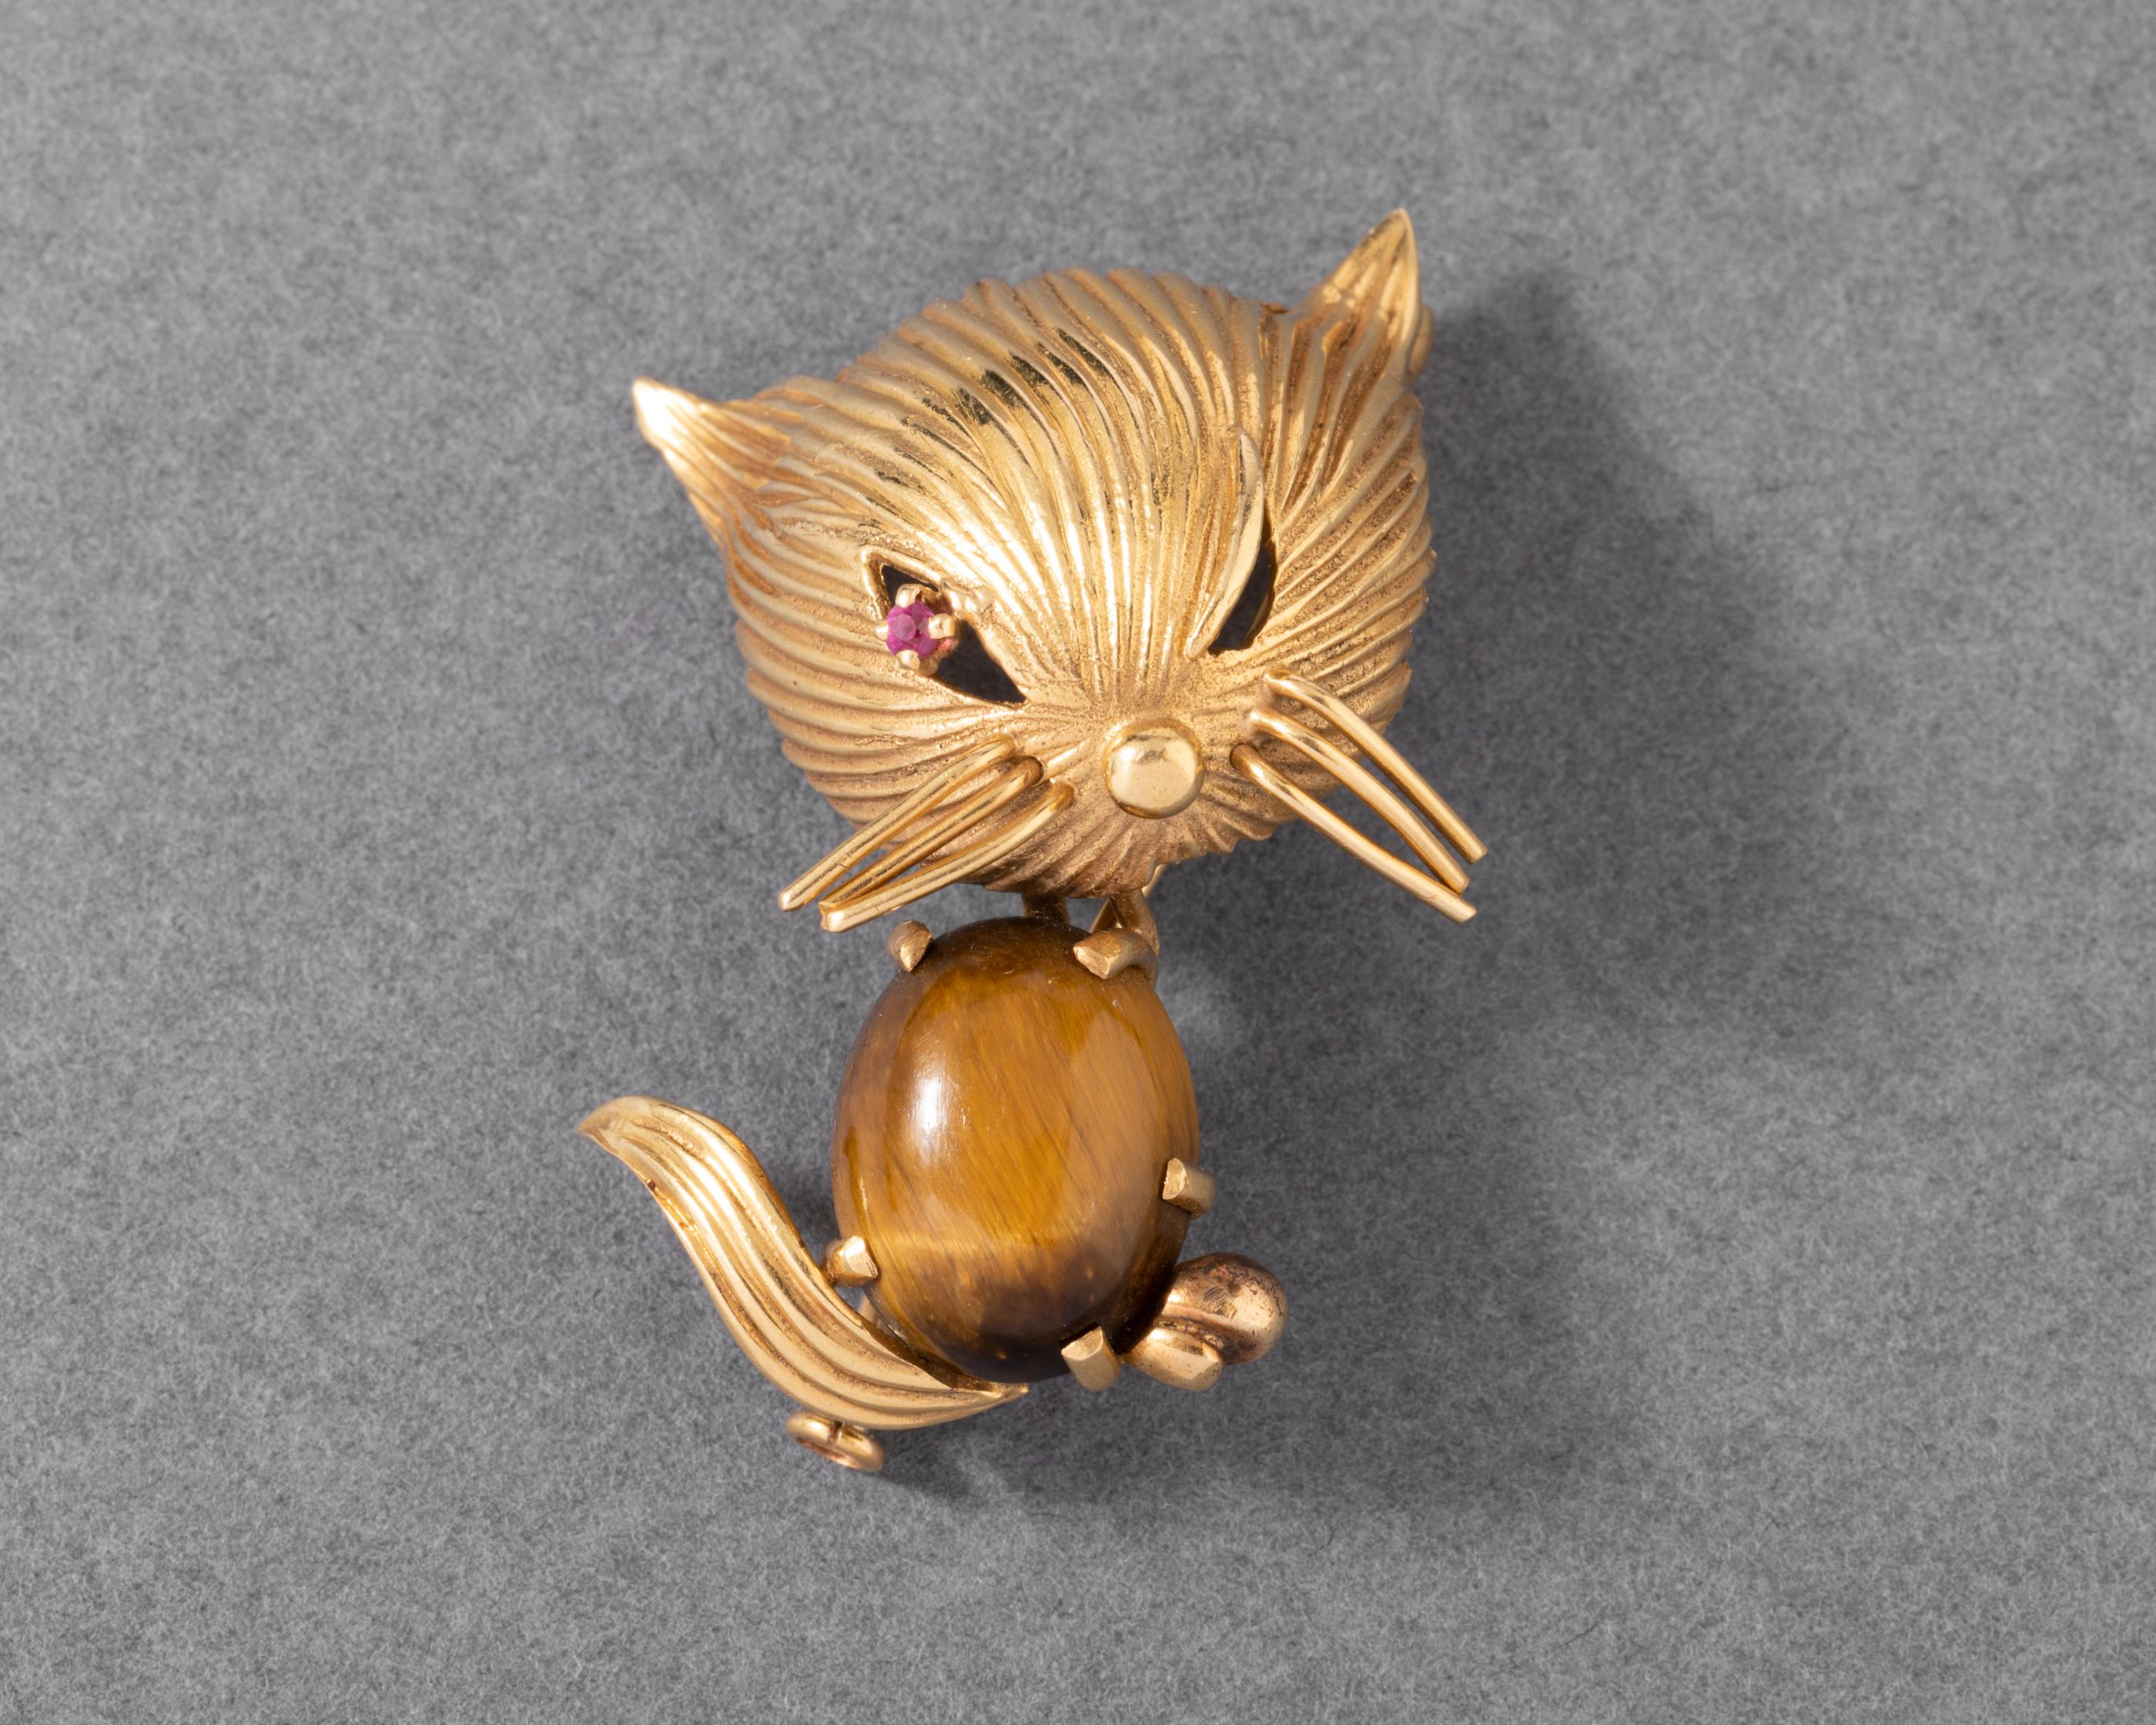 One lovely vintage brooch, made in France circa 1960.
Made in yellow gold 18k and set with a tiger eye cabochon. The eye is a ruby.
Multiple hallmarks for gold 18k (the eagle head), Hallmark of maker (Unknown).
Dimensions: 40 and 25 mm.
Weight: 9.70